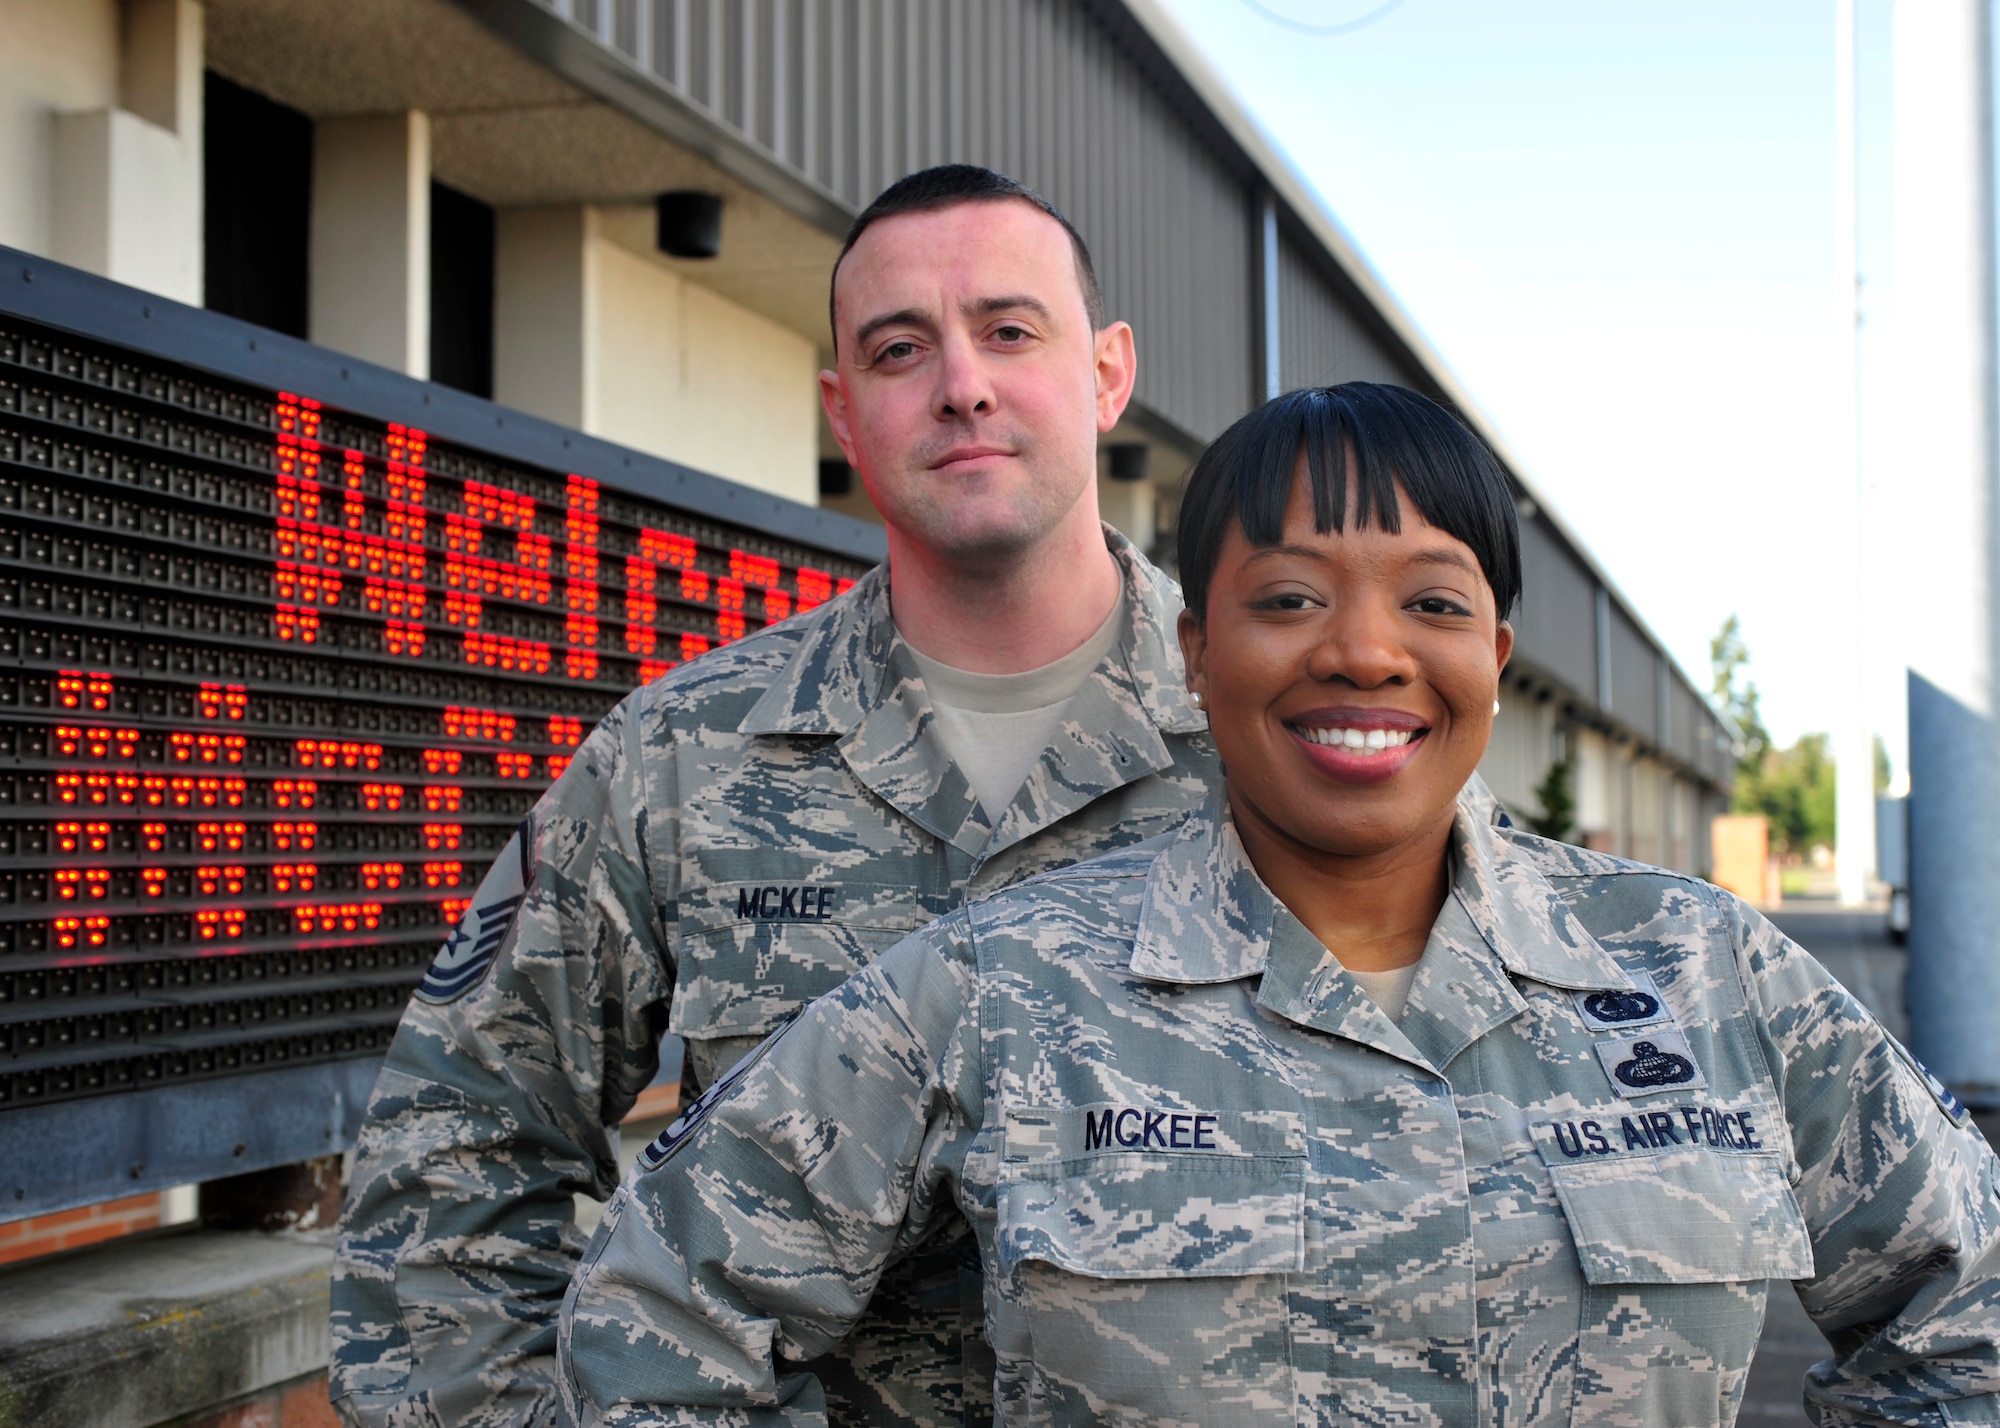 Master Sgt. Theodore (T.J.) McKee, 62nd Aerial Port Squadron passenger service operations NCOIC, and wife, Master Sgt. Tiffany McKee, 627th Logistics Readiness Squadron logistics plans superintendent, pose for a photo on the McChord Field flightline at Joint Base Lewis-McChord, Wash., March 16, 2017. T.J. was awarded NCO of the Year for 2016 while Tiffany was awarded SNCO of the Year at the Team McChord Annual Awards Banquet. March 10, 2017. (U.S. Air Force photo/Staff Sgt. Whitney Amstutz)